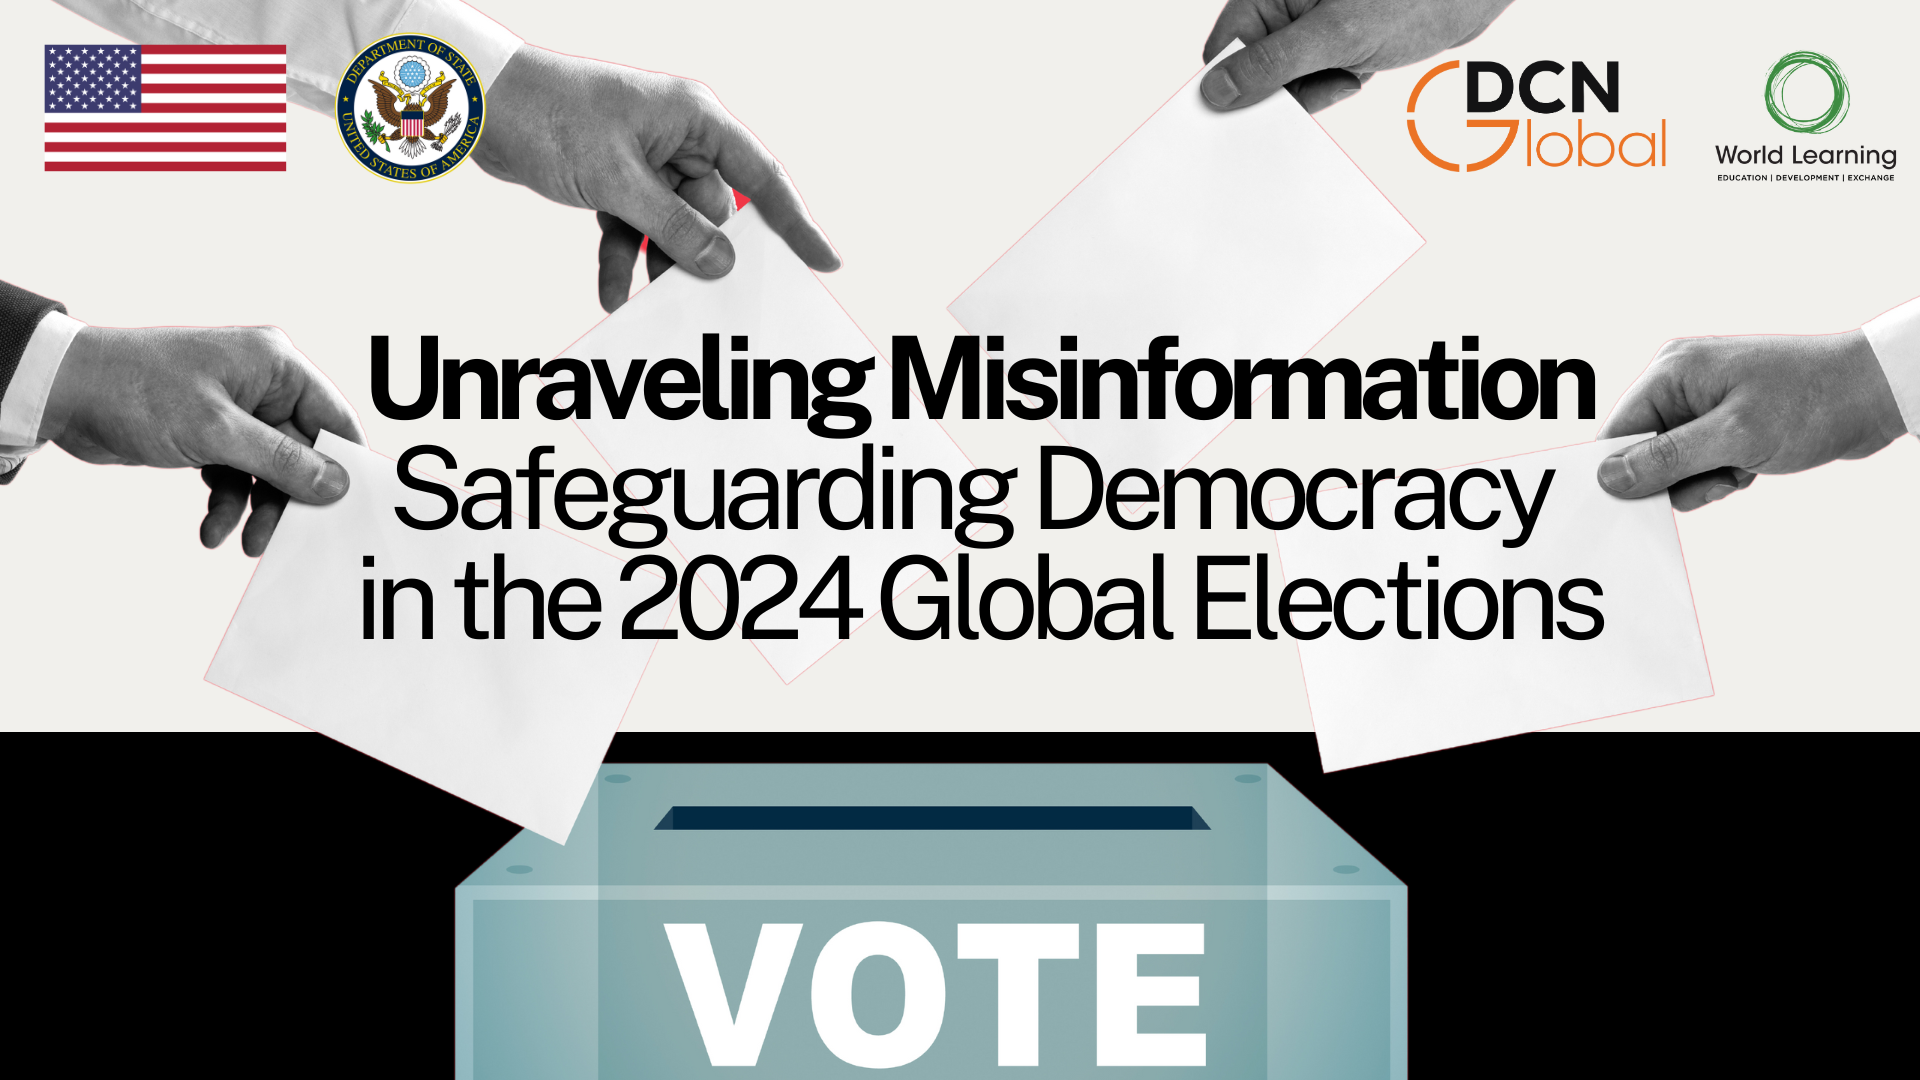 Unraveling Misinformation: Safeguarding Democracy in the 2024 Global Elections